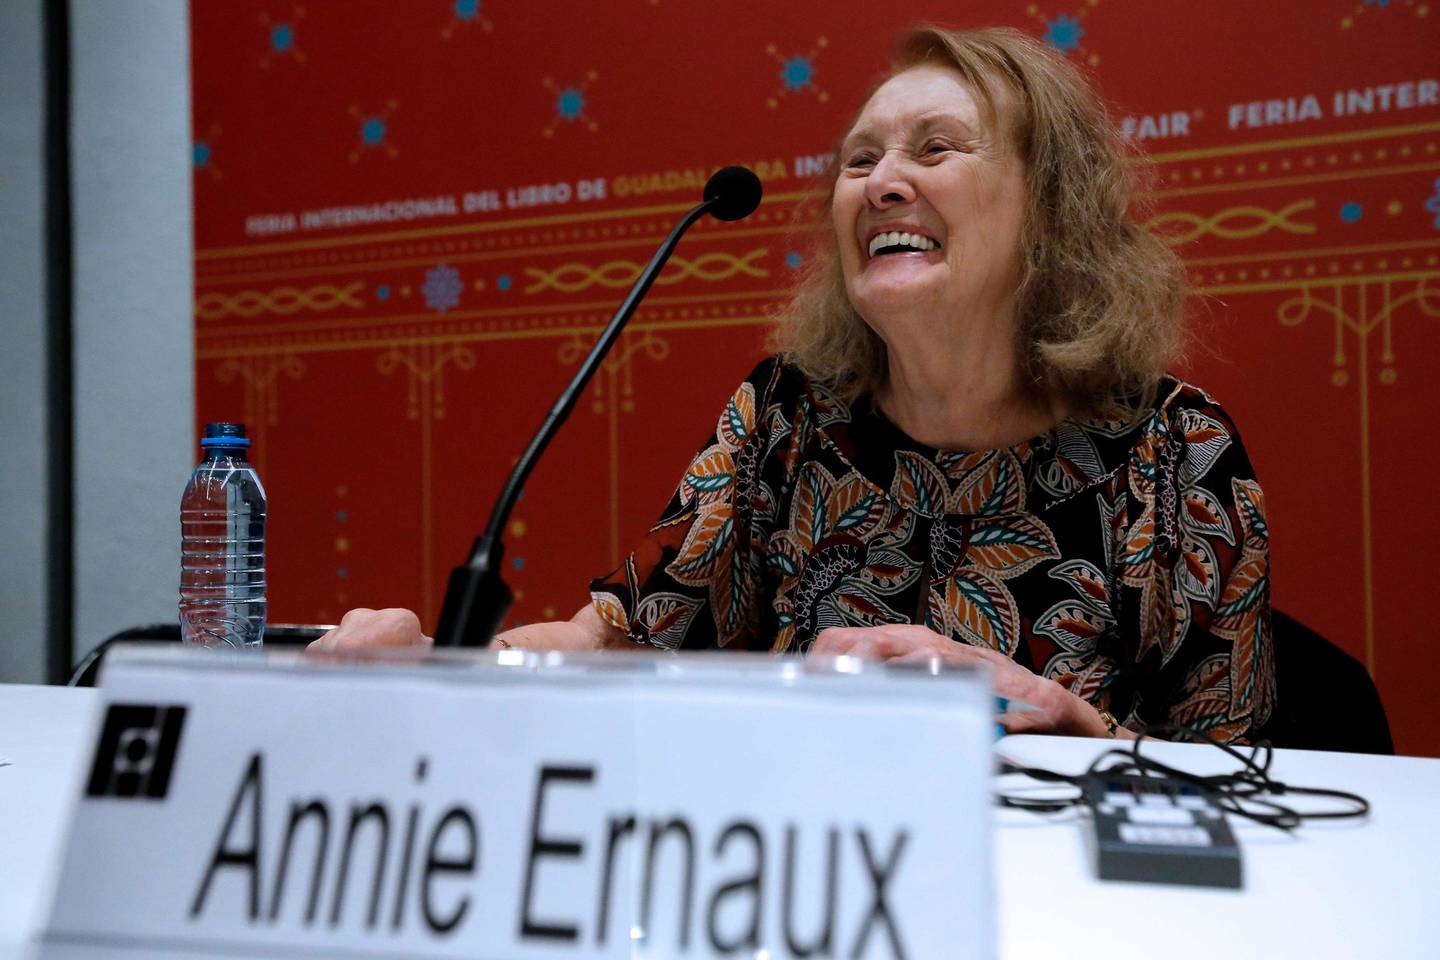 French writer Annie Ernaux, awarded with the 2019 Formentor Prix, speaks during the Guadalajara International Book Fair, in Guadalajara, Mexico, on December 4, 2019. (Photo by Ulises Ruiz / AFP)